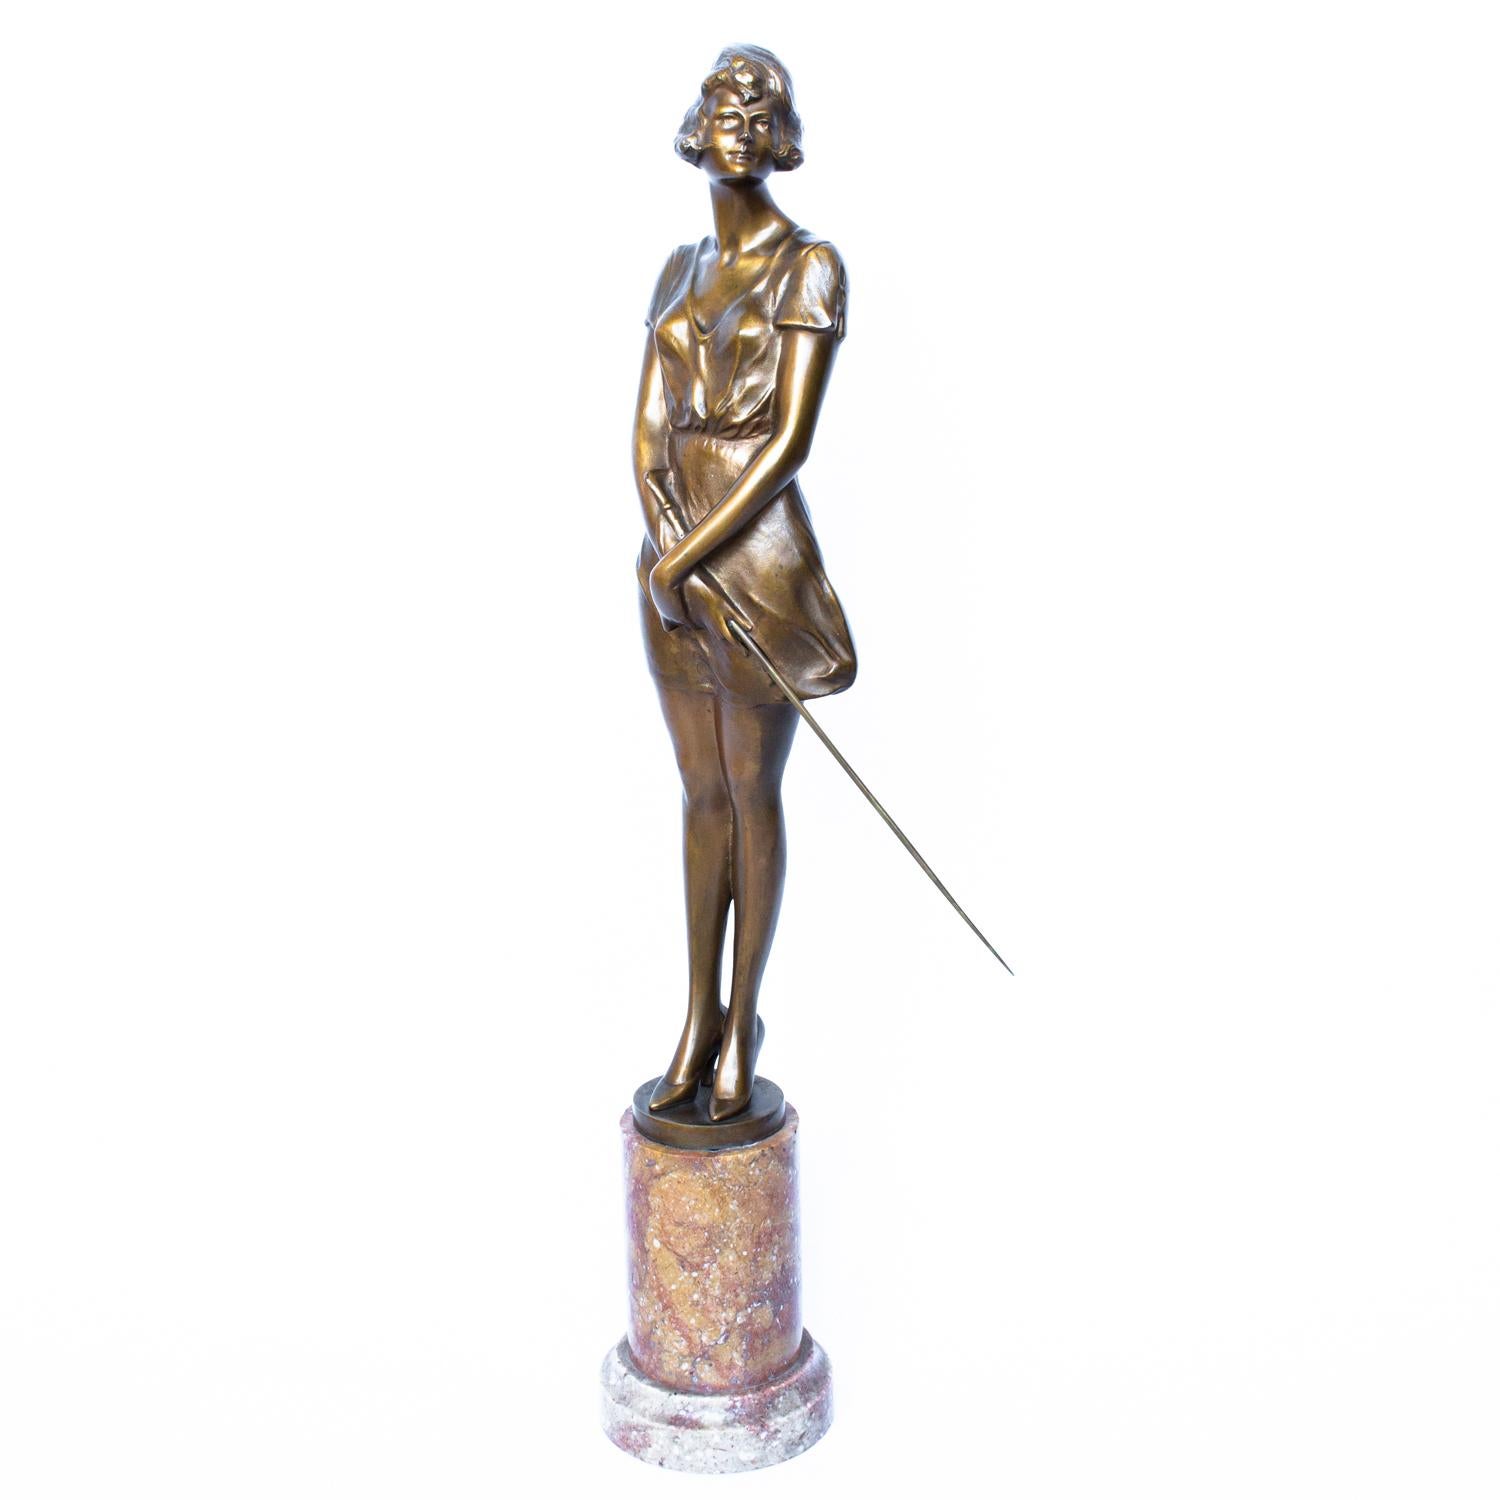 An Art Deco, gilt bronze figure of a beautiful woman, poised holding a riding whip. Signed 